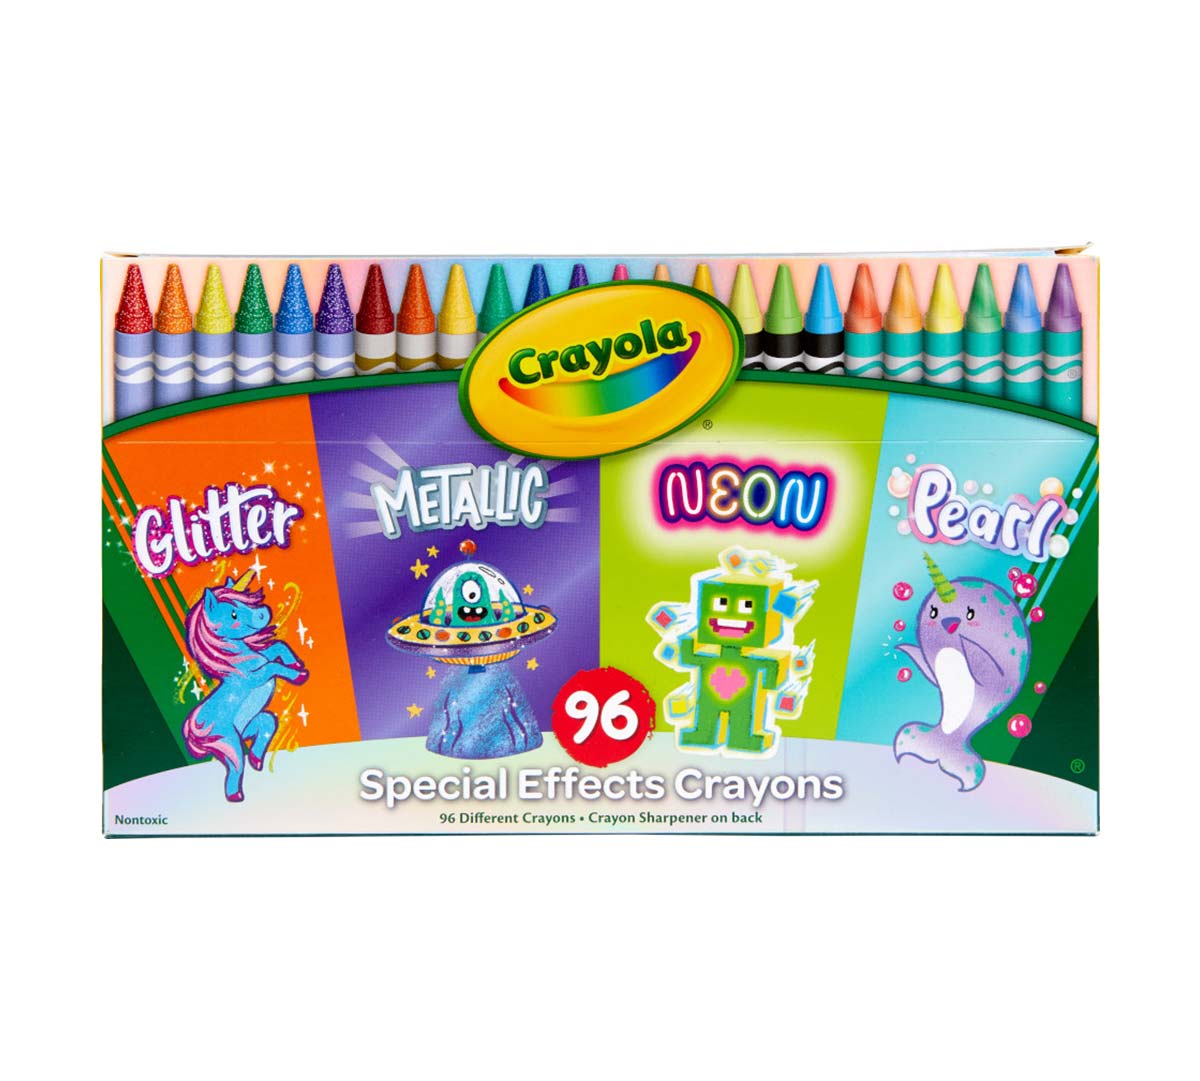 https://shop.crayola.com/on/demandware.static/-/Sites-crayola-storefront/default/dw1b1221b1/images/52-3453-0-200_Special-Effects-Crayons_96ct_F1.jpg